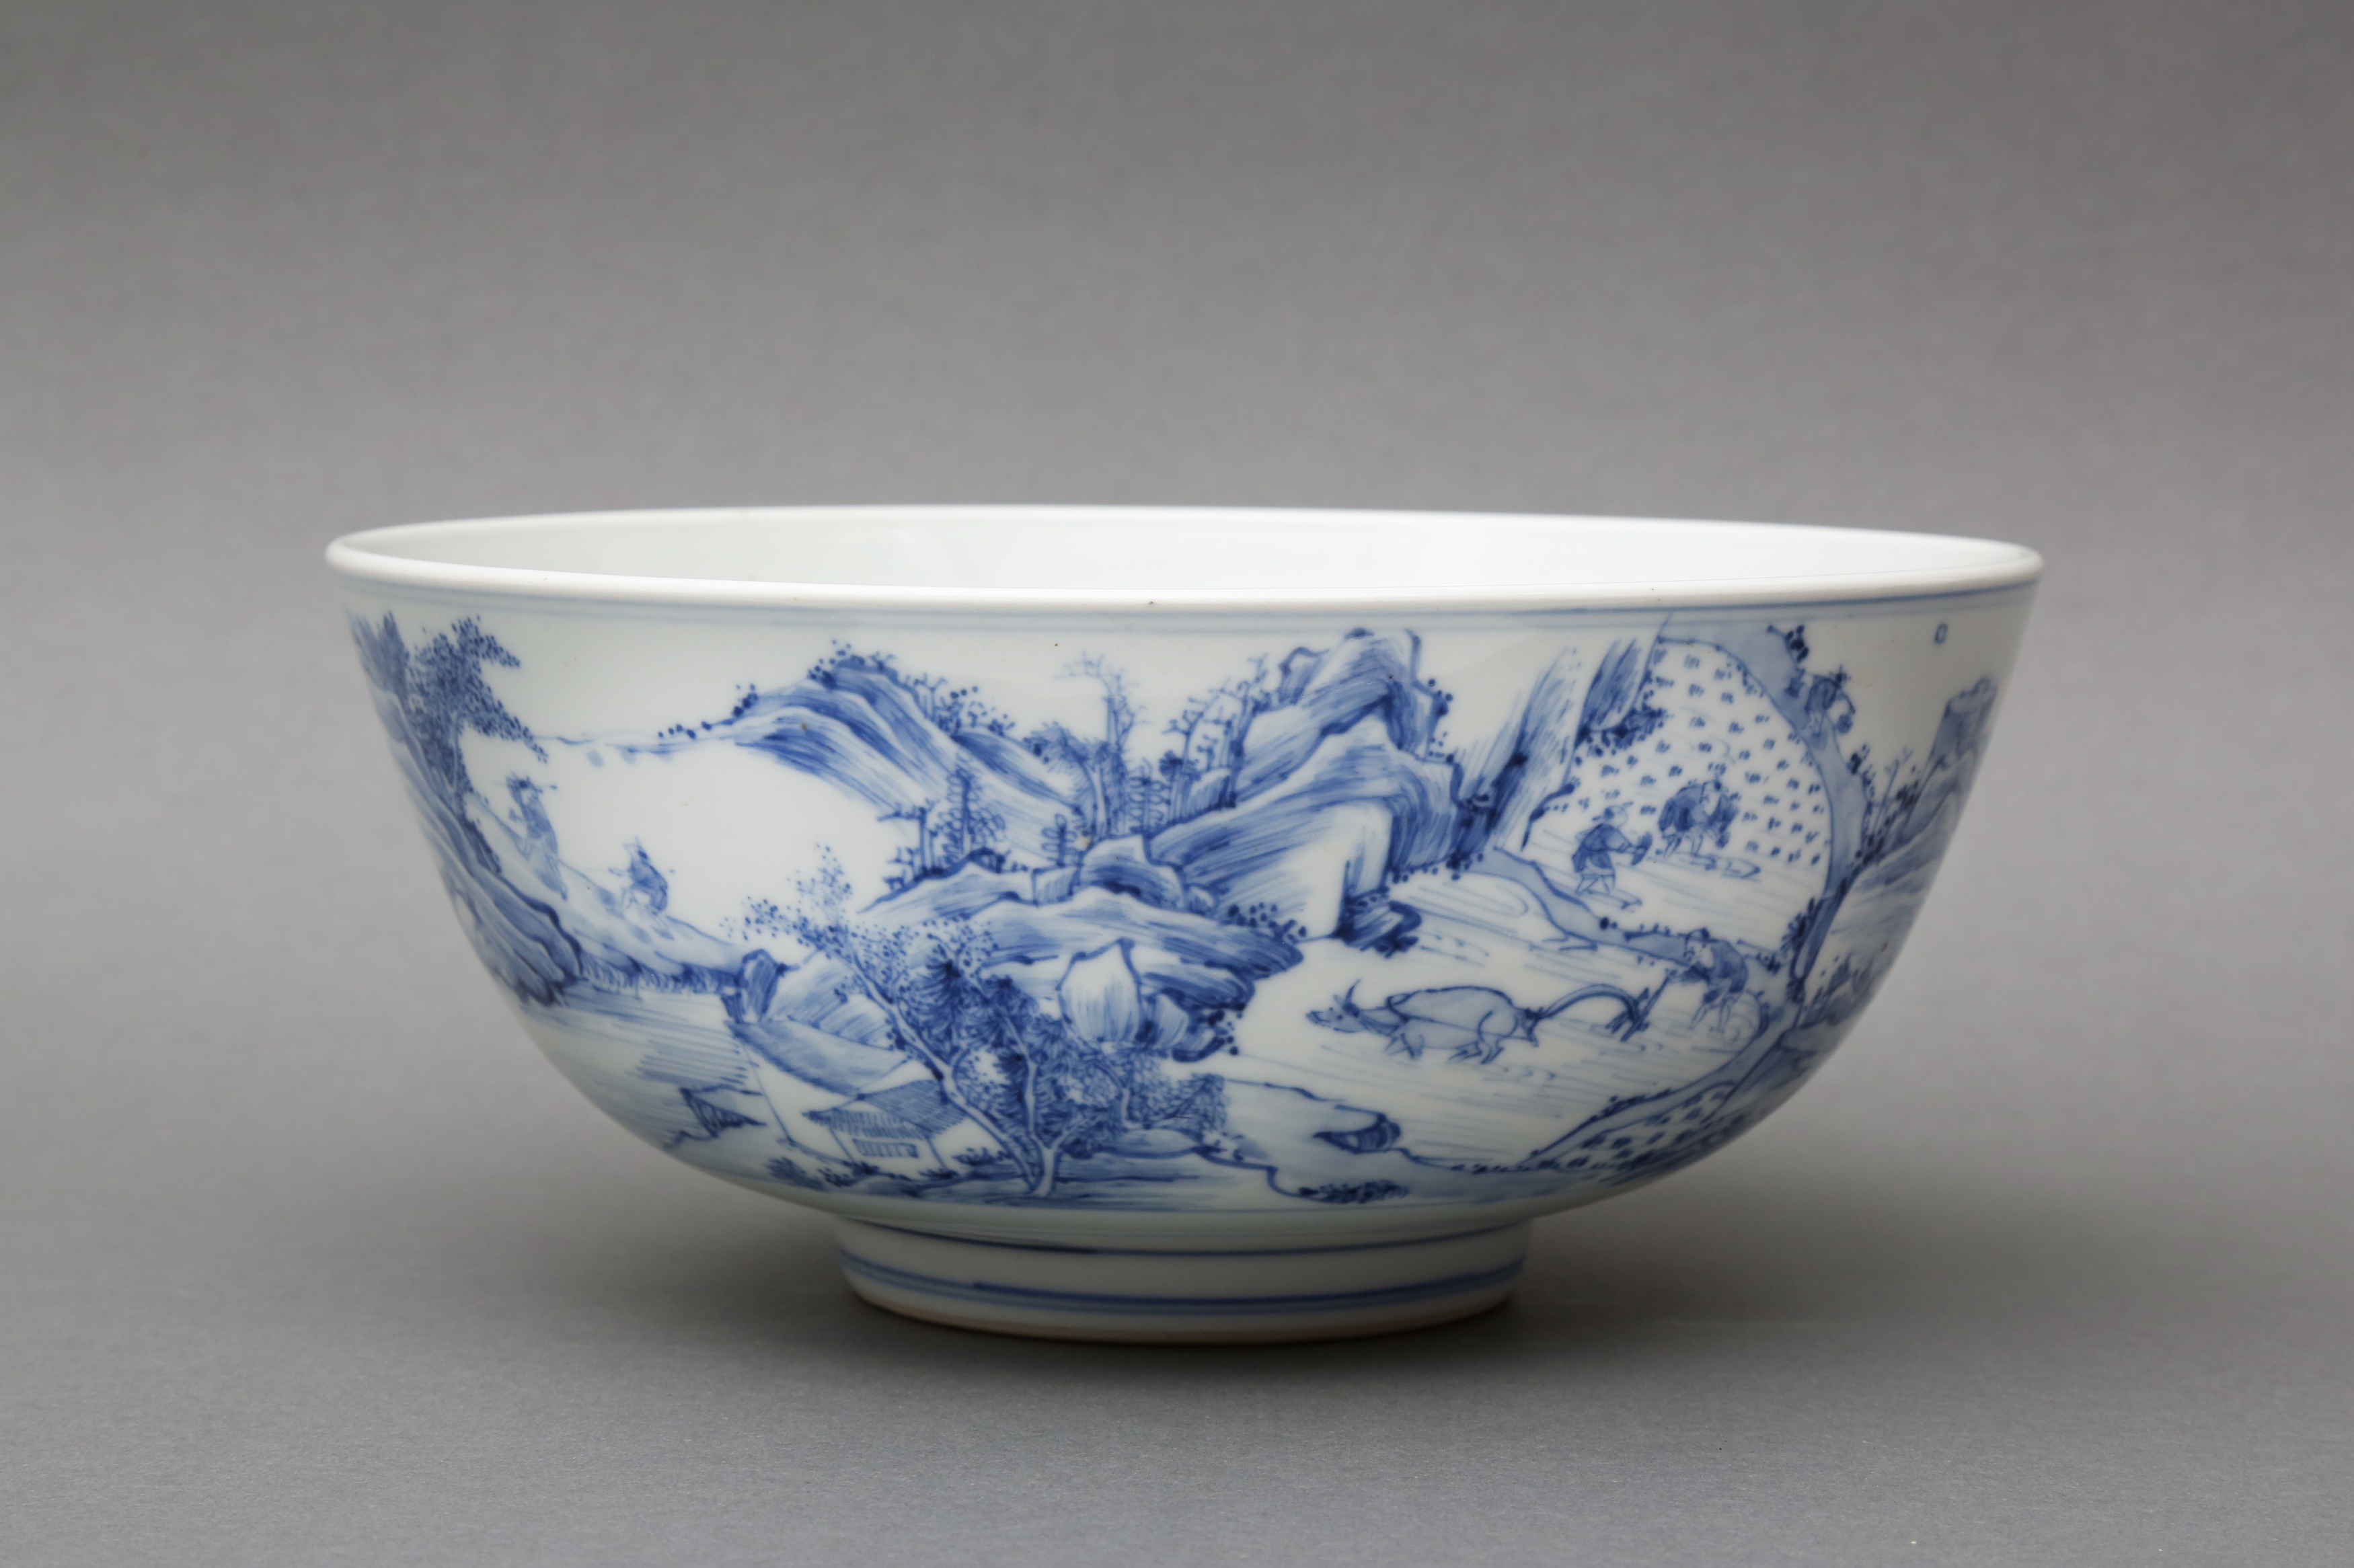 A RARE CHINESE BLUE AND WHITE 'MASTER OF THE ROCKS' BOWL 清康熙或雍正 青花山水人物圖紋盌